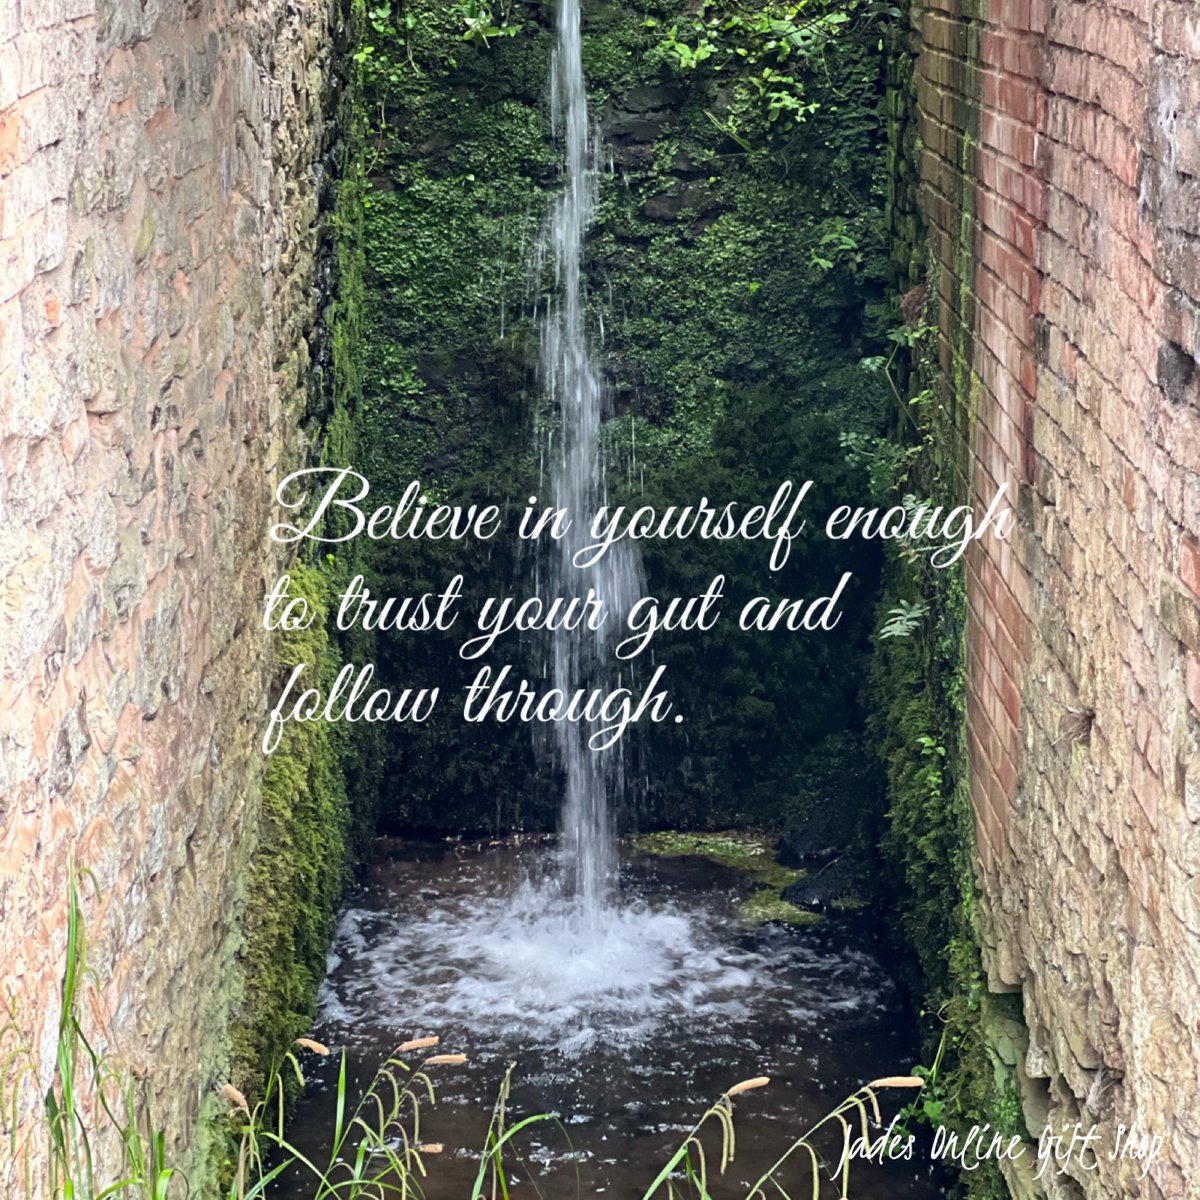 “Believe in yourself enough to trust your gut and follow through” 

#thursdaymotivation #quoteoftheday #trustyourintuition #waterfall #photo #amateurphotography #derbyshire #smallbusiness #eBayseller #Freeukdelivery #gifts #homedecor